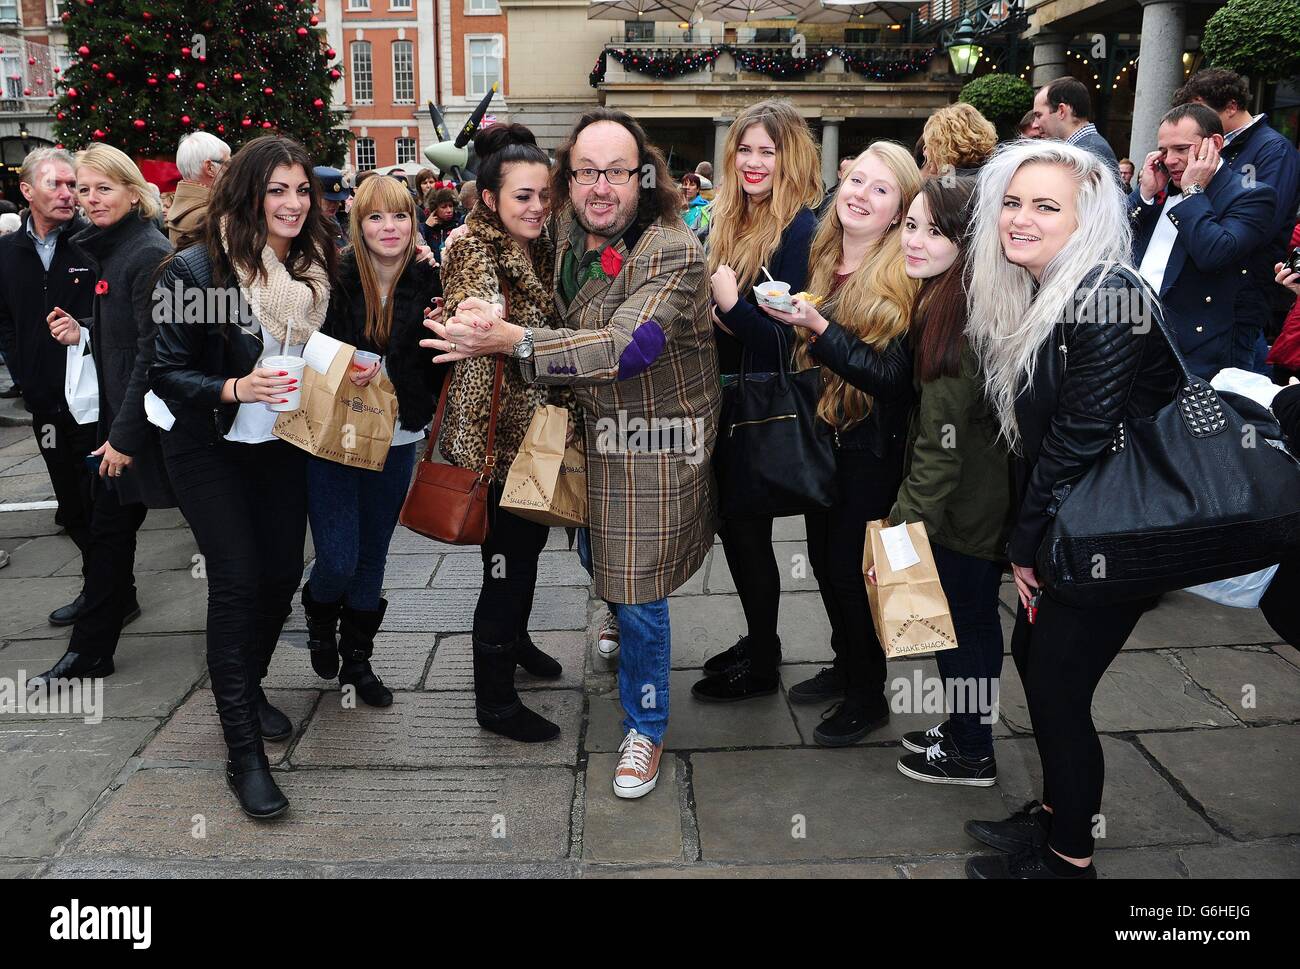 Strictly contestants selling poppies in London. Dave Myers poses with fans as he sells poppies in Covent Garden, London. Stock Photo